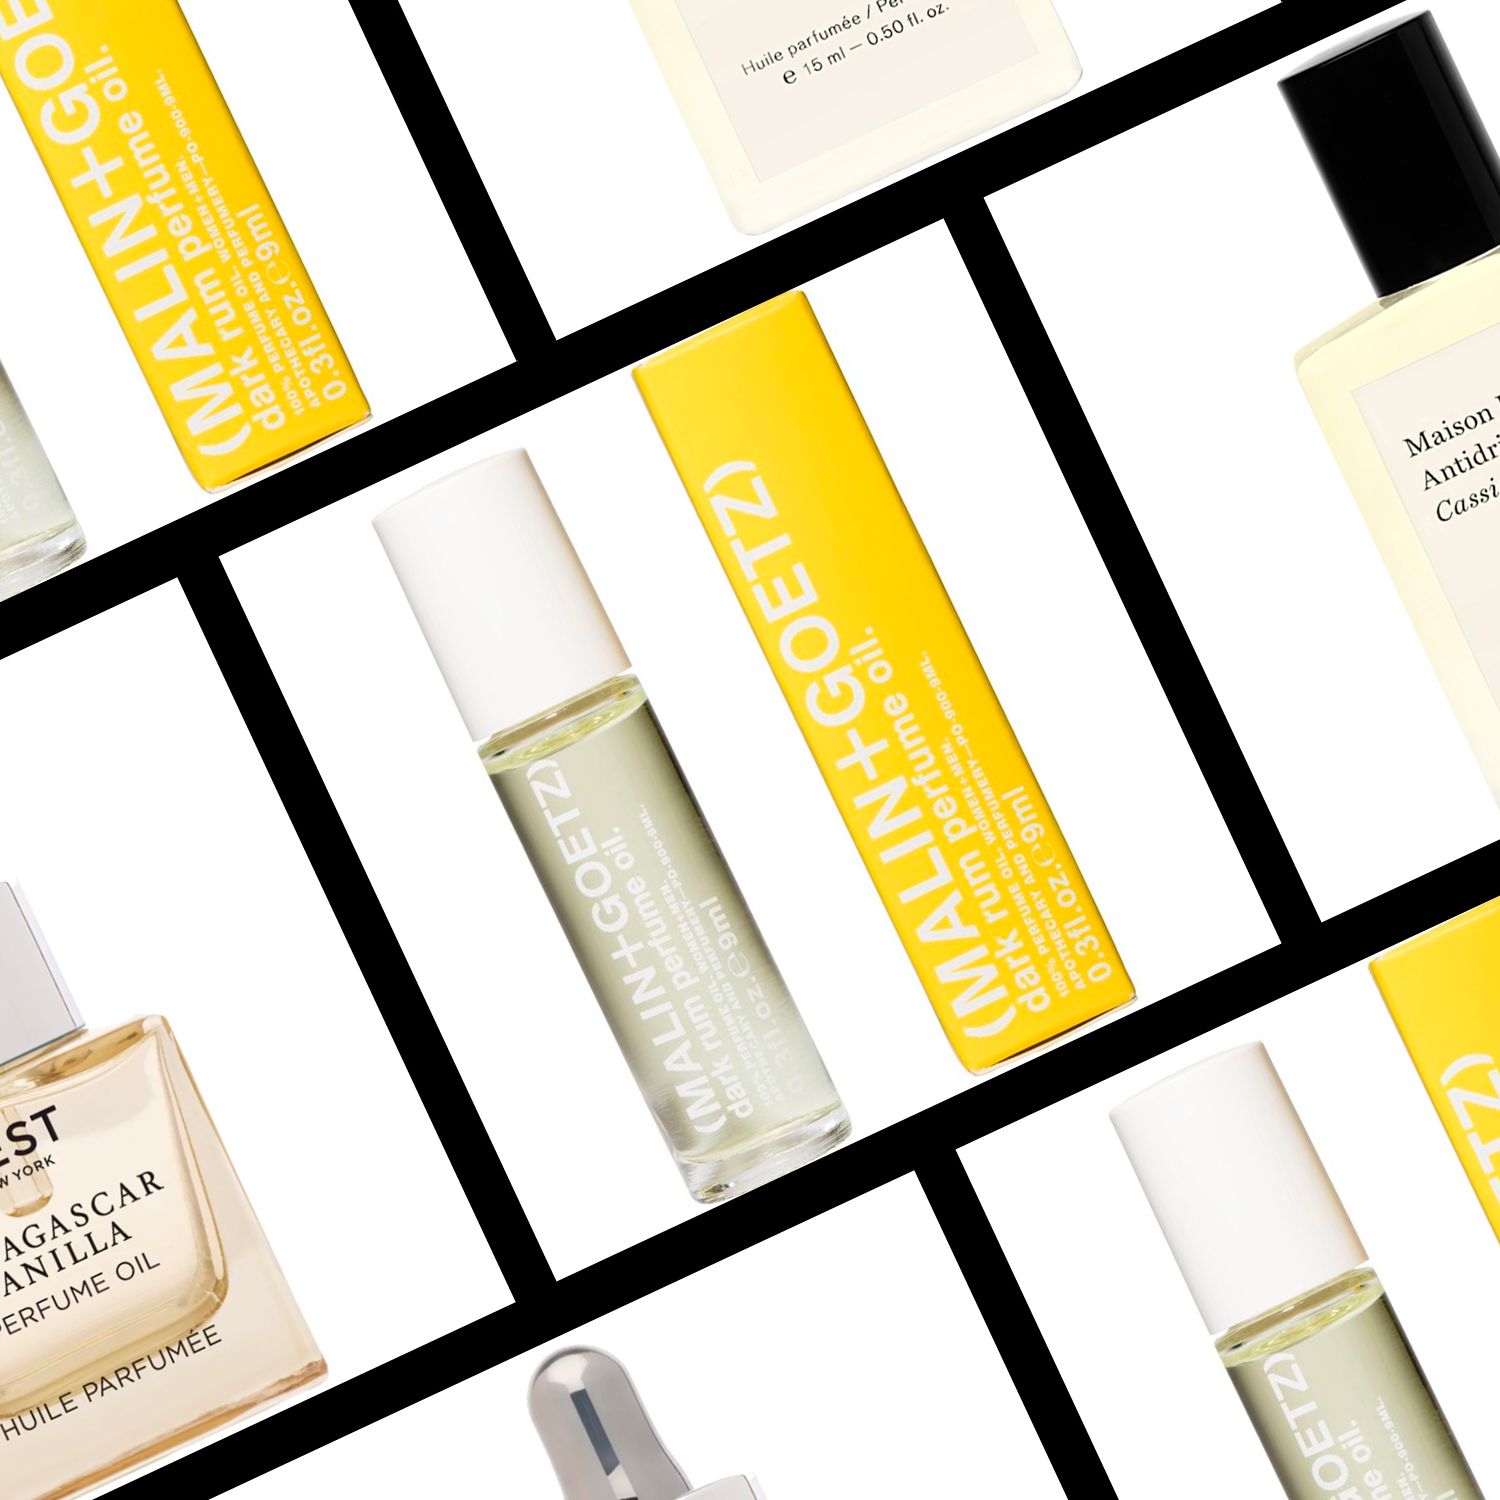 The 17 Best Perfume Oils for Just Enough Scent